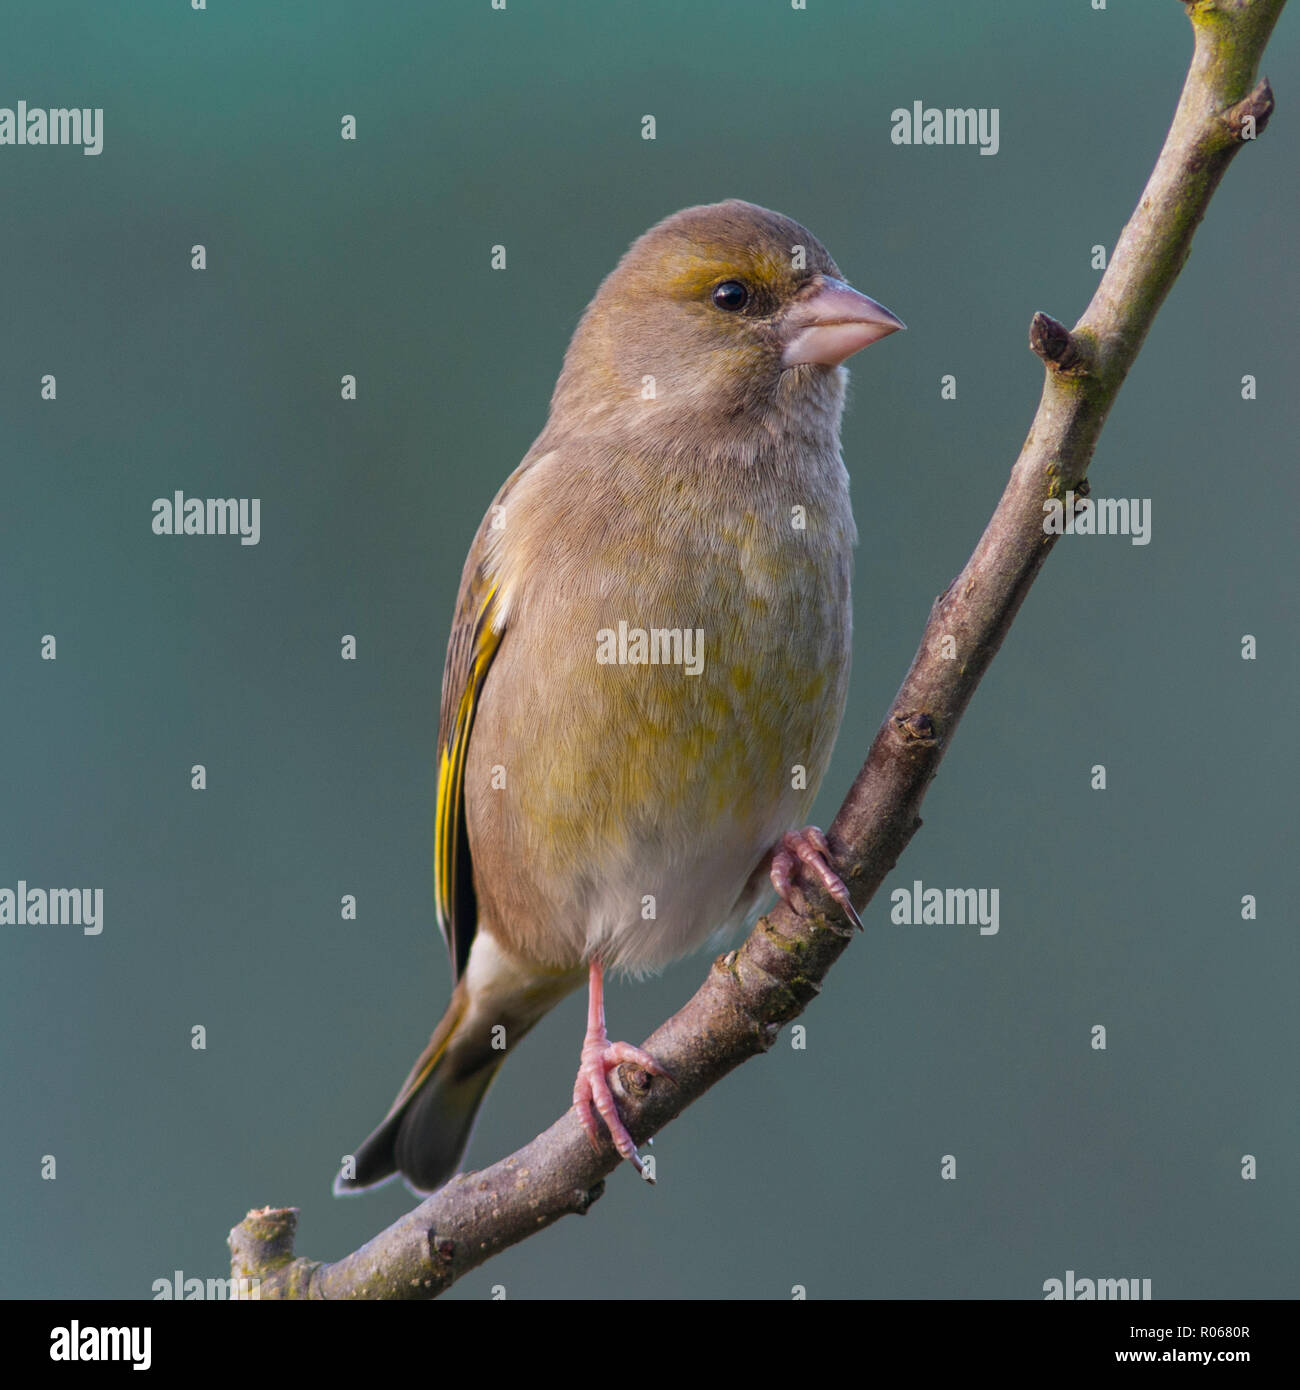 A female Greenfinch (Carduelis chloris) feeding in freezing conditions in a Norfolk garden Stock Photo